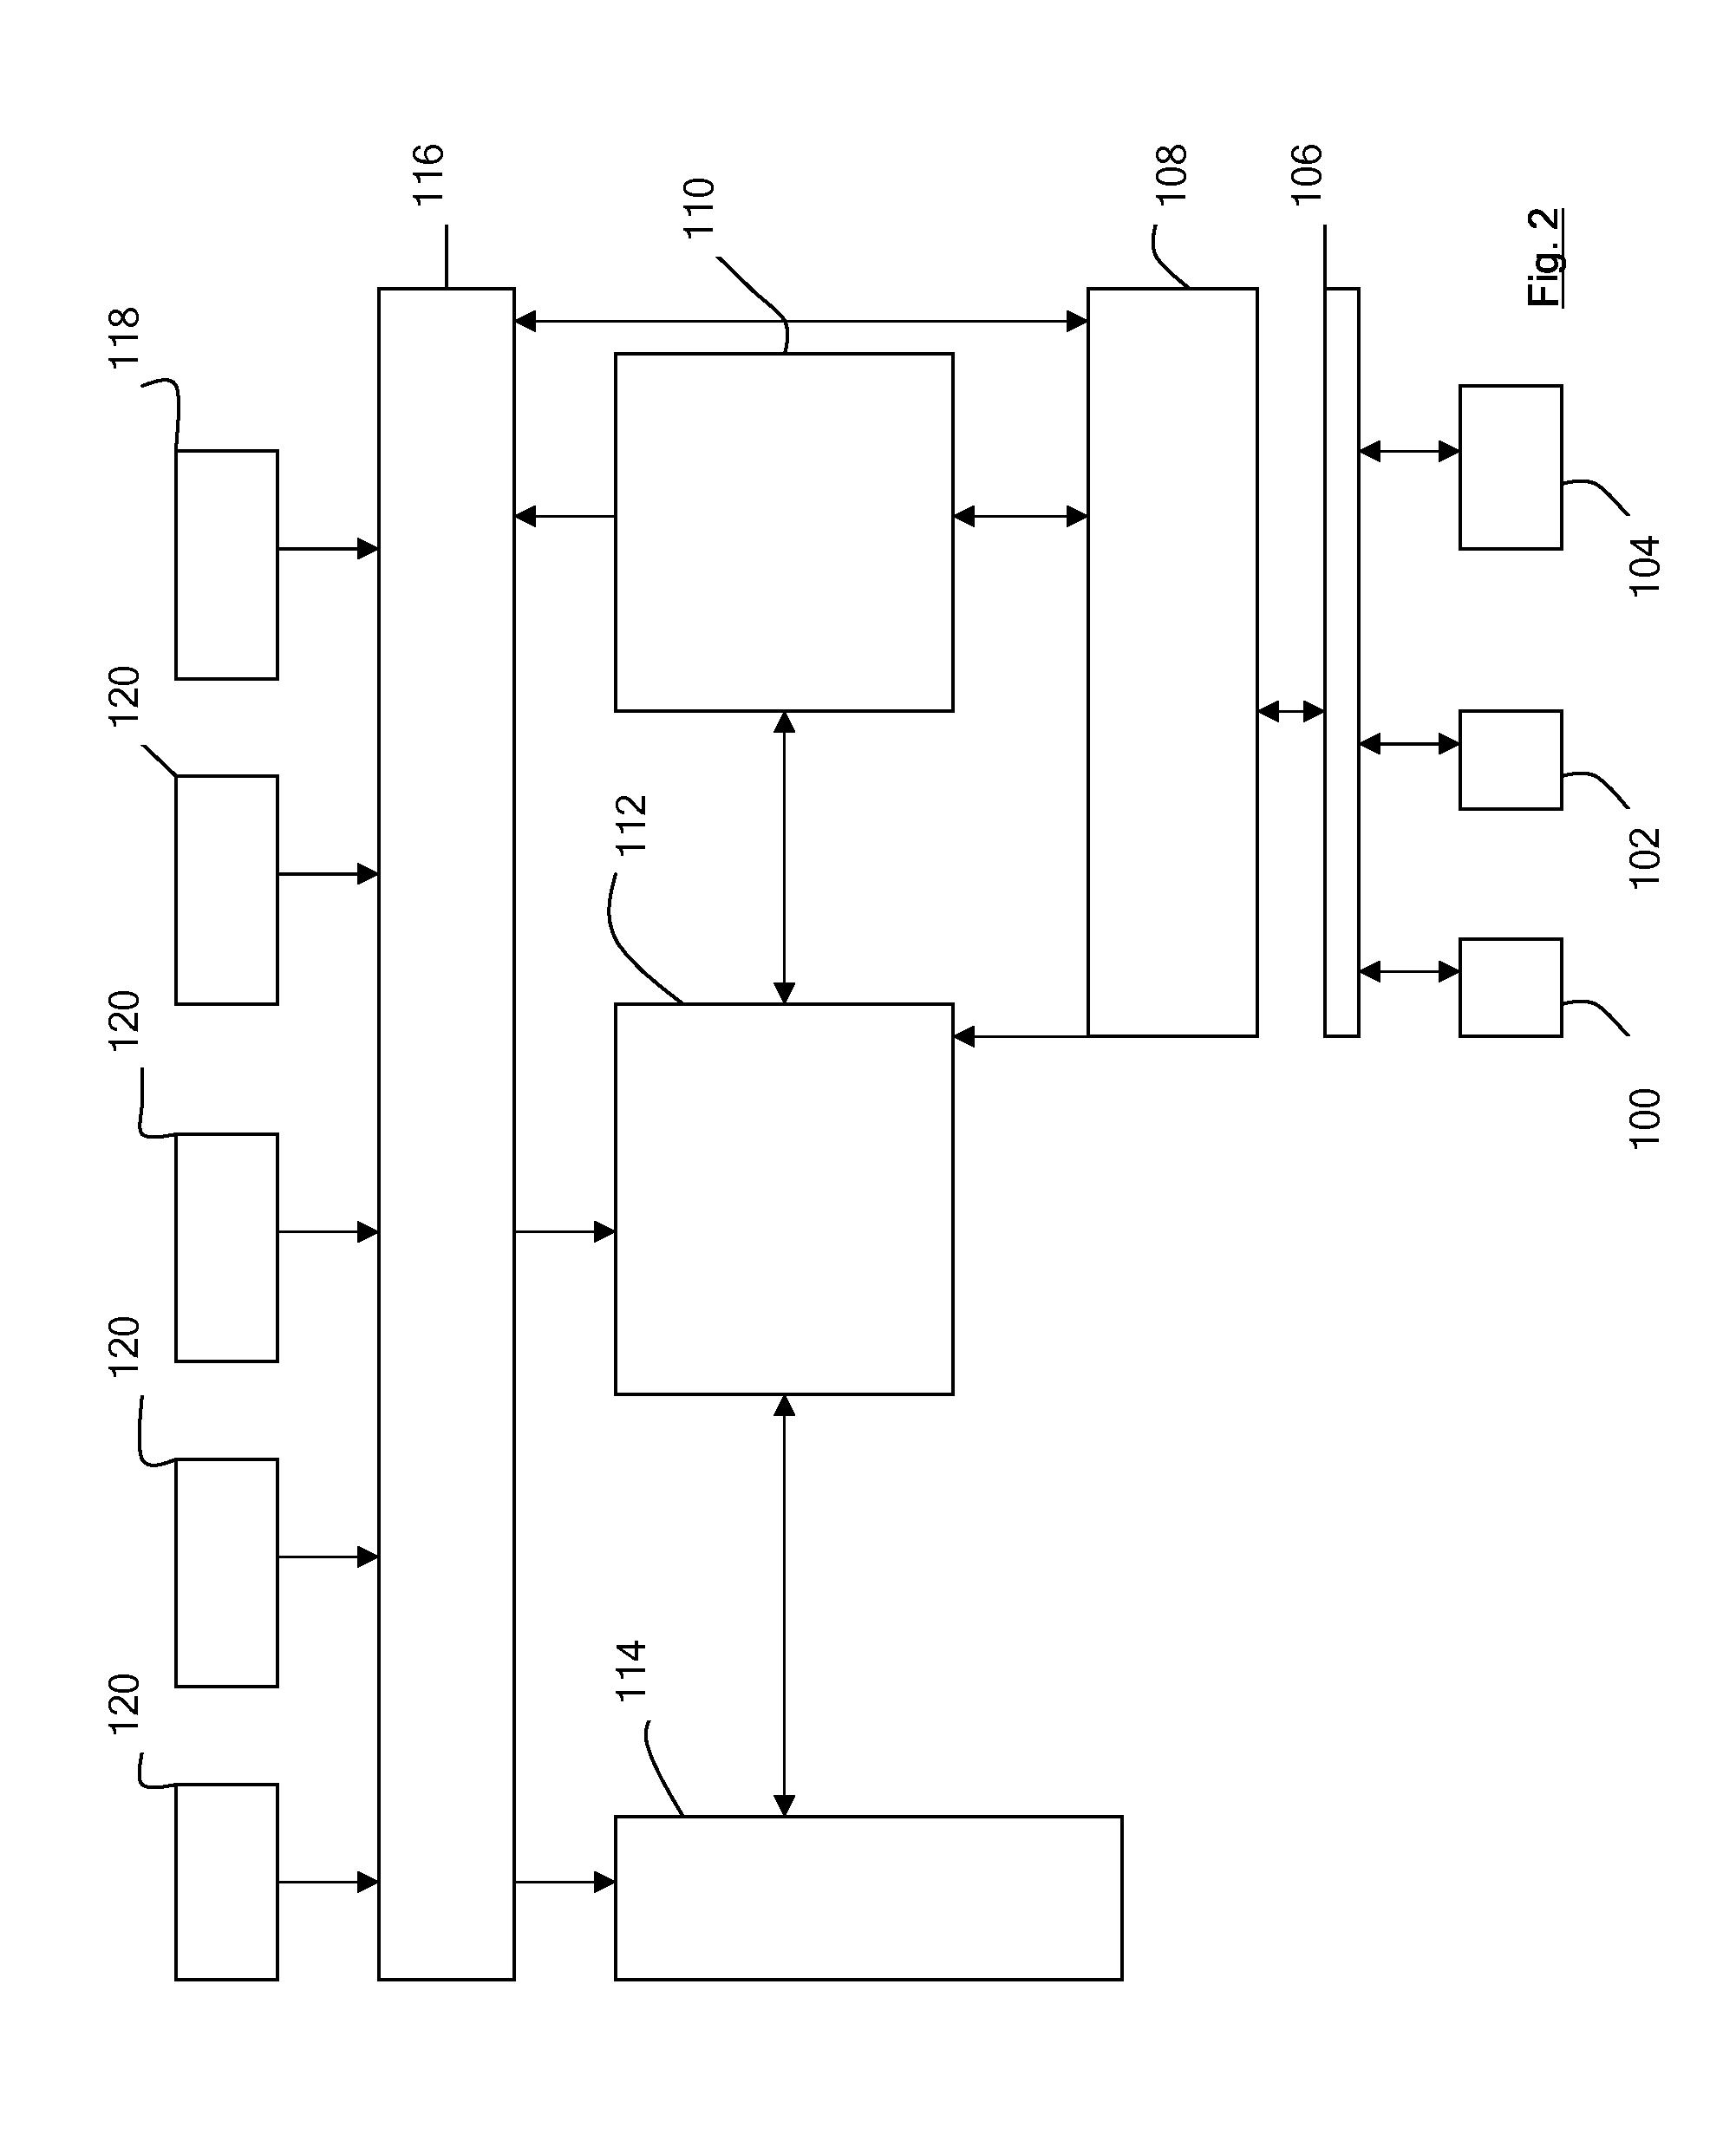 Event processing apparatus and methods